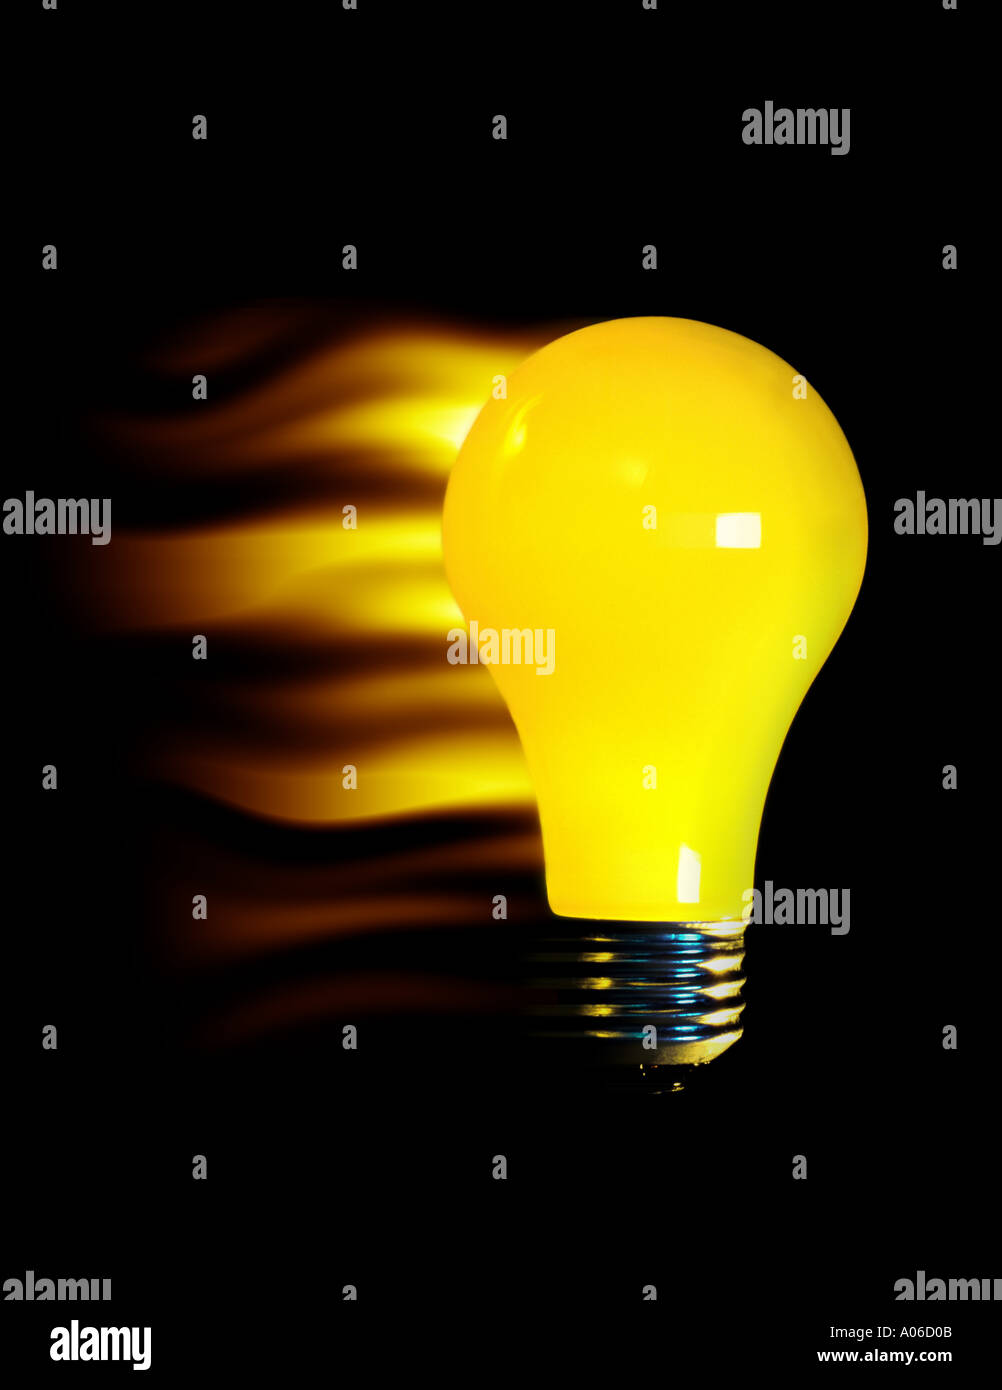 Lightbulb with flames shooting out Stock Photo